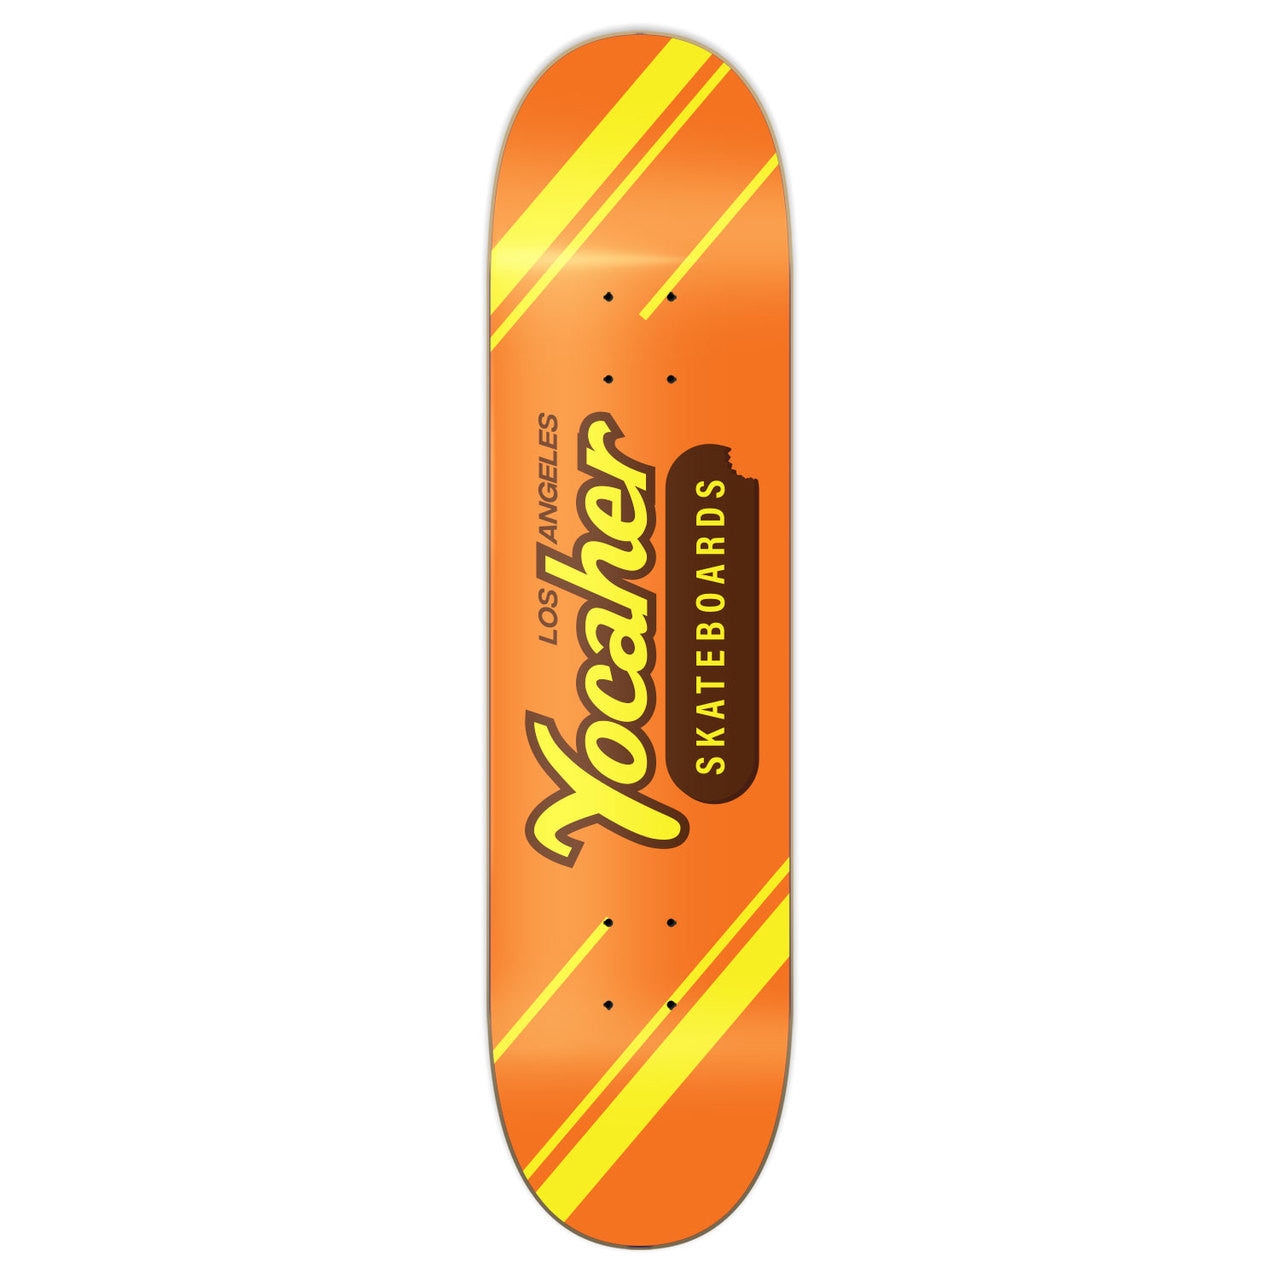 Yocaher Graphic Skateboard Deck  - CANDY Series - PB & C